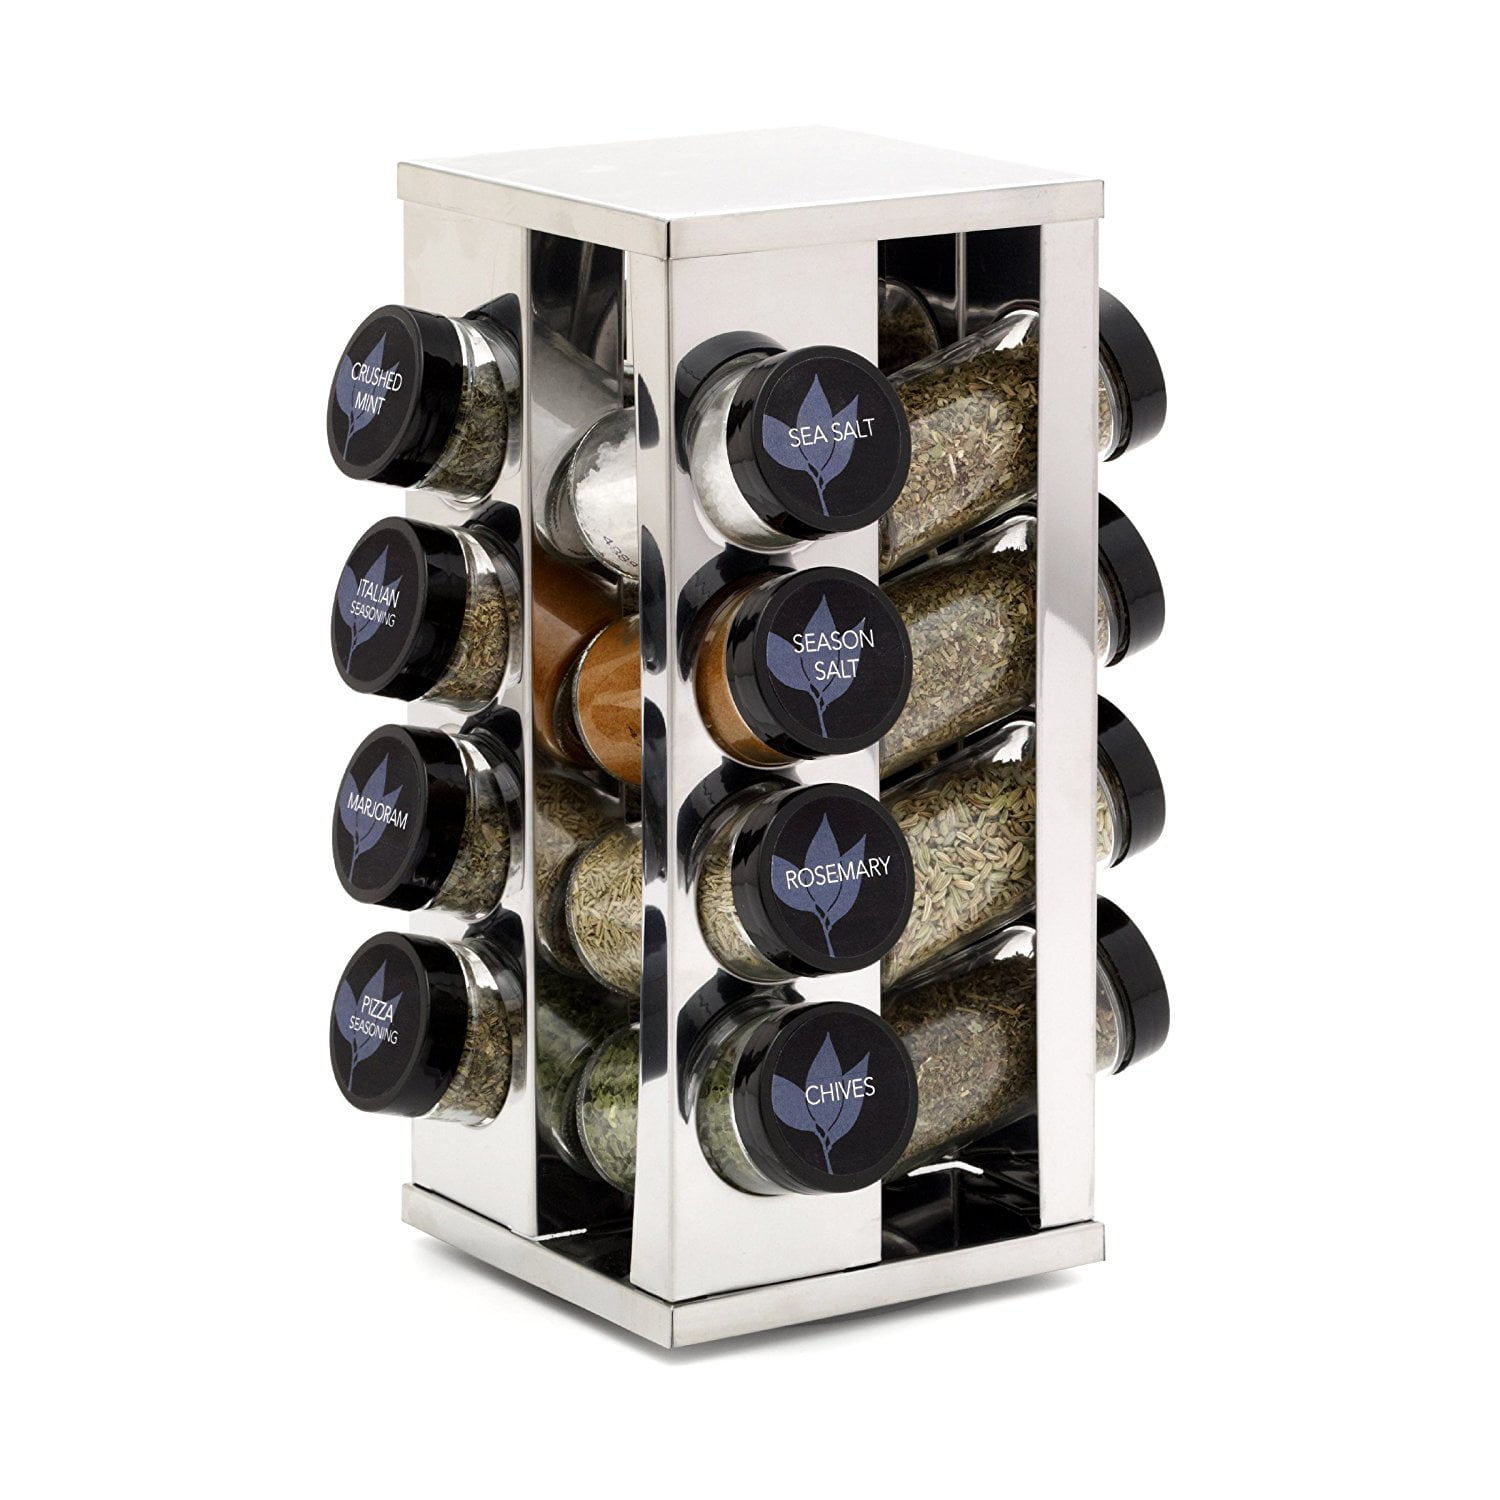 Kamenstein Heritage 16-Jar Revolving Countertop Spice Rack with Free Spice  Refills for 5 Years